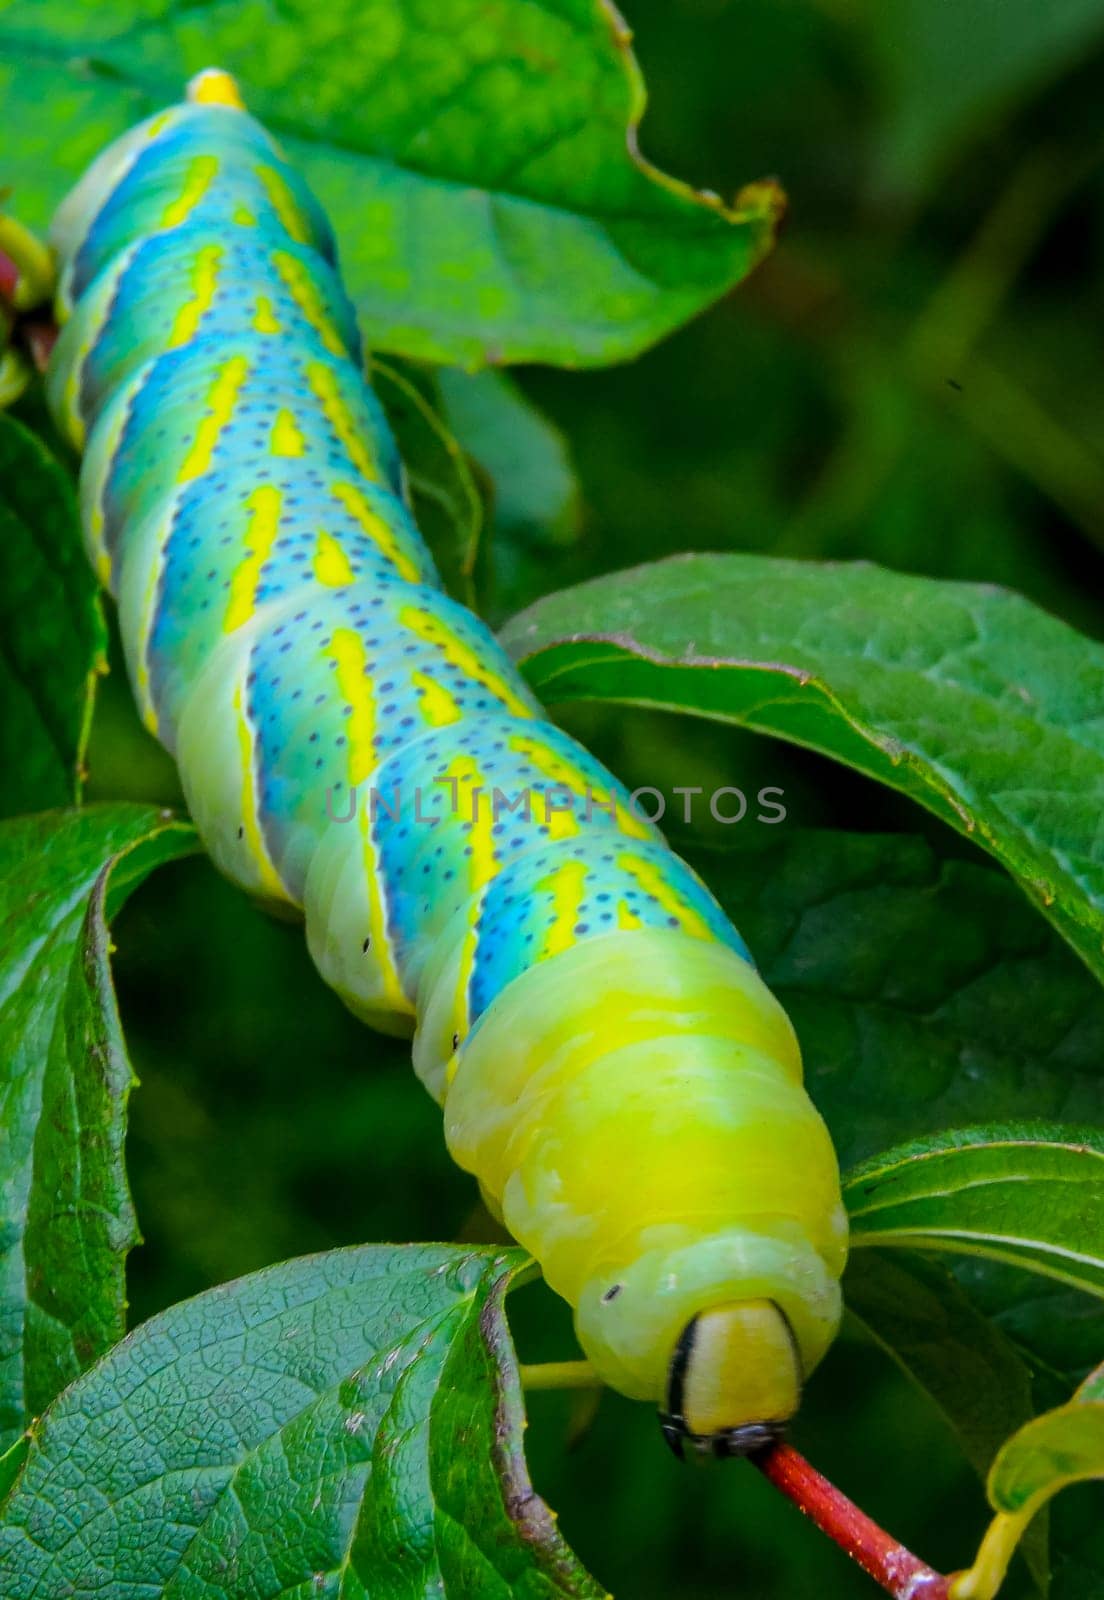 The African death's-head hawkmoth (Acherontia atropos), A nocturnal butterfly caterpillar crawls on the red stem of a plant